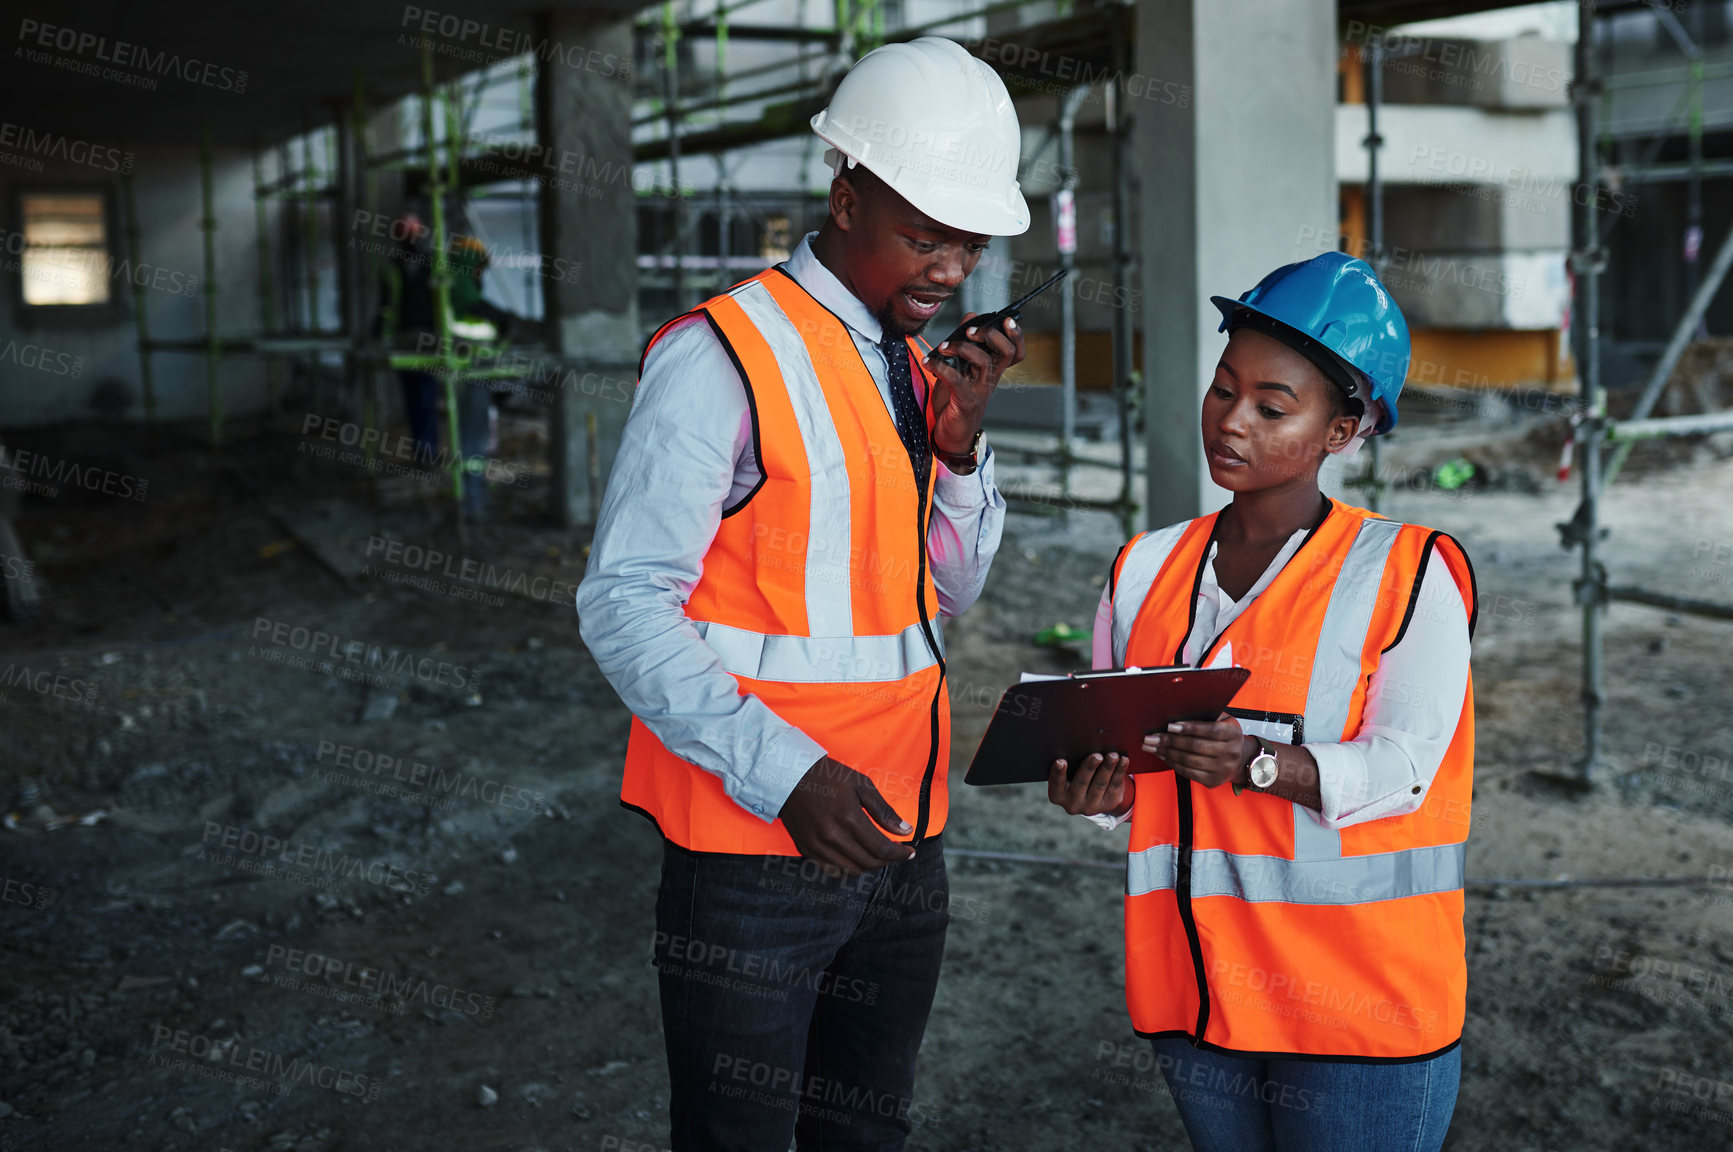 Buy stock photo Shot of a young man and woman having a discussion while working at a construction site